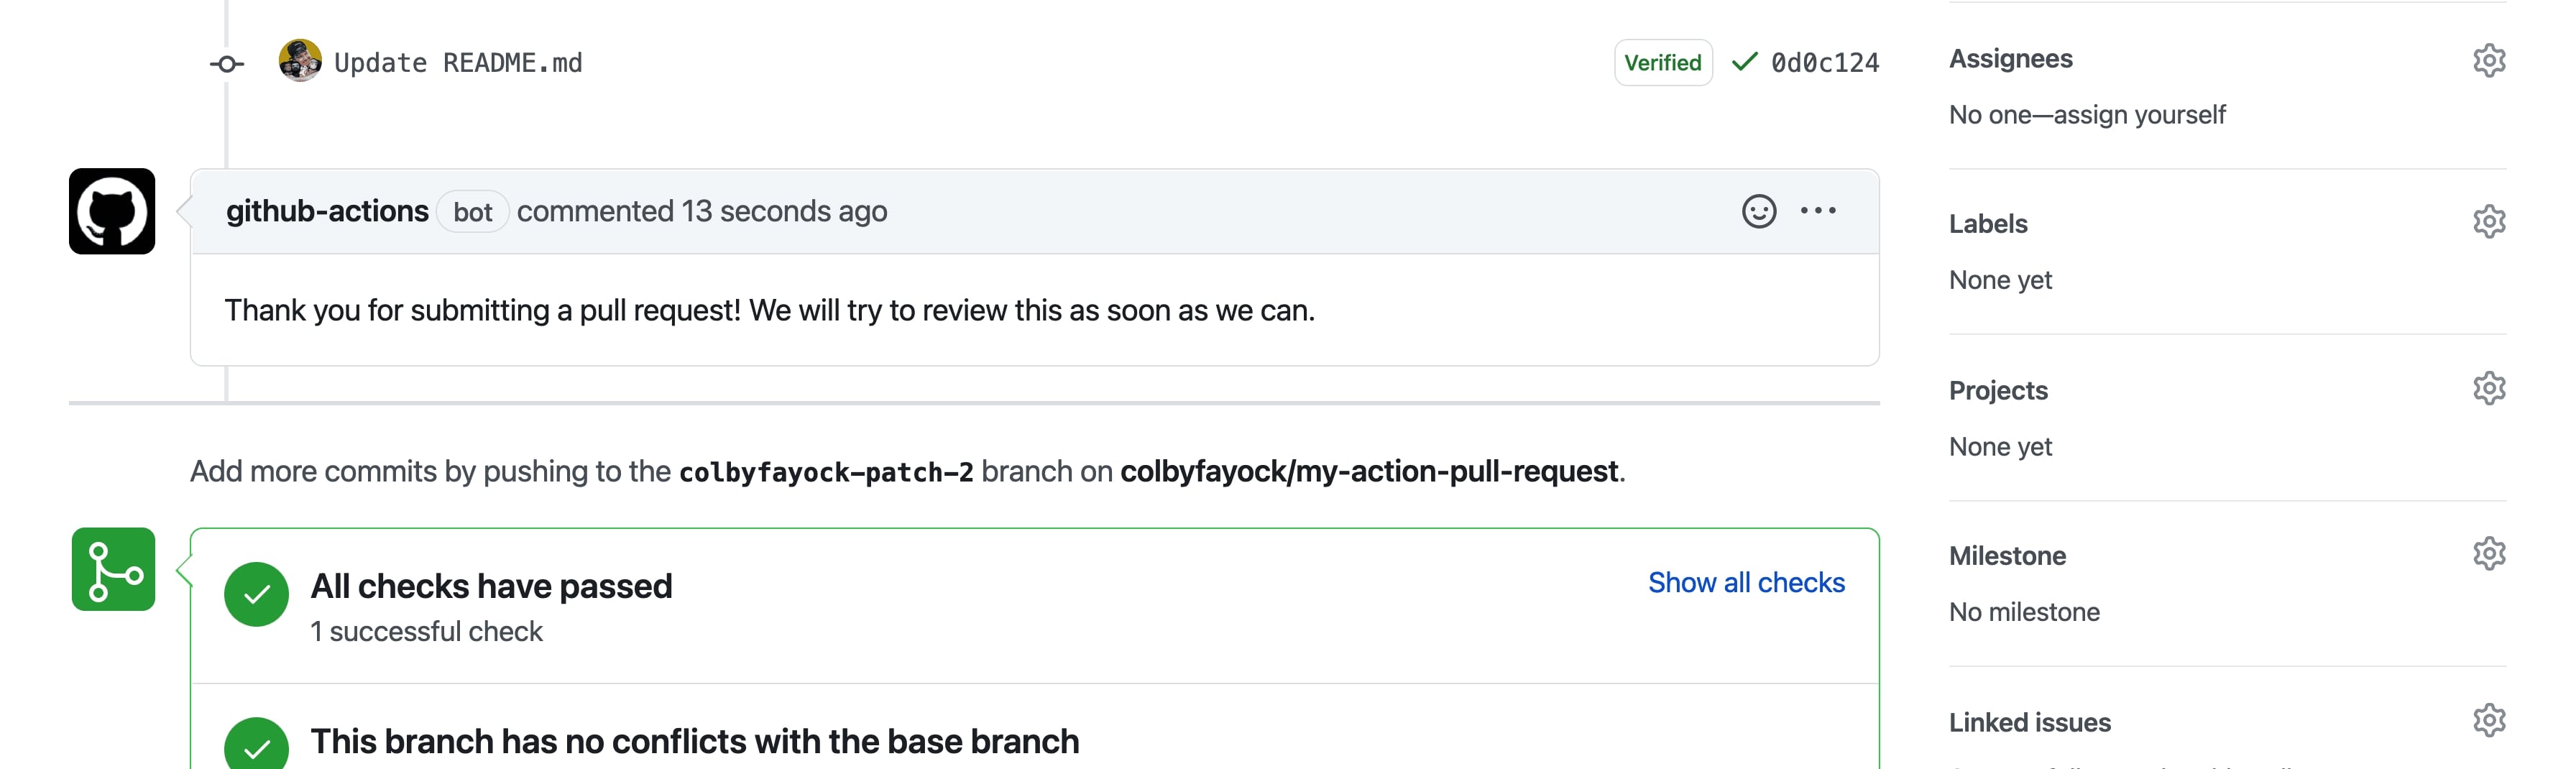 "Thank you" message on a Pull Request